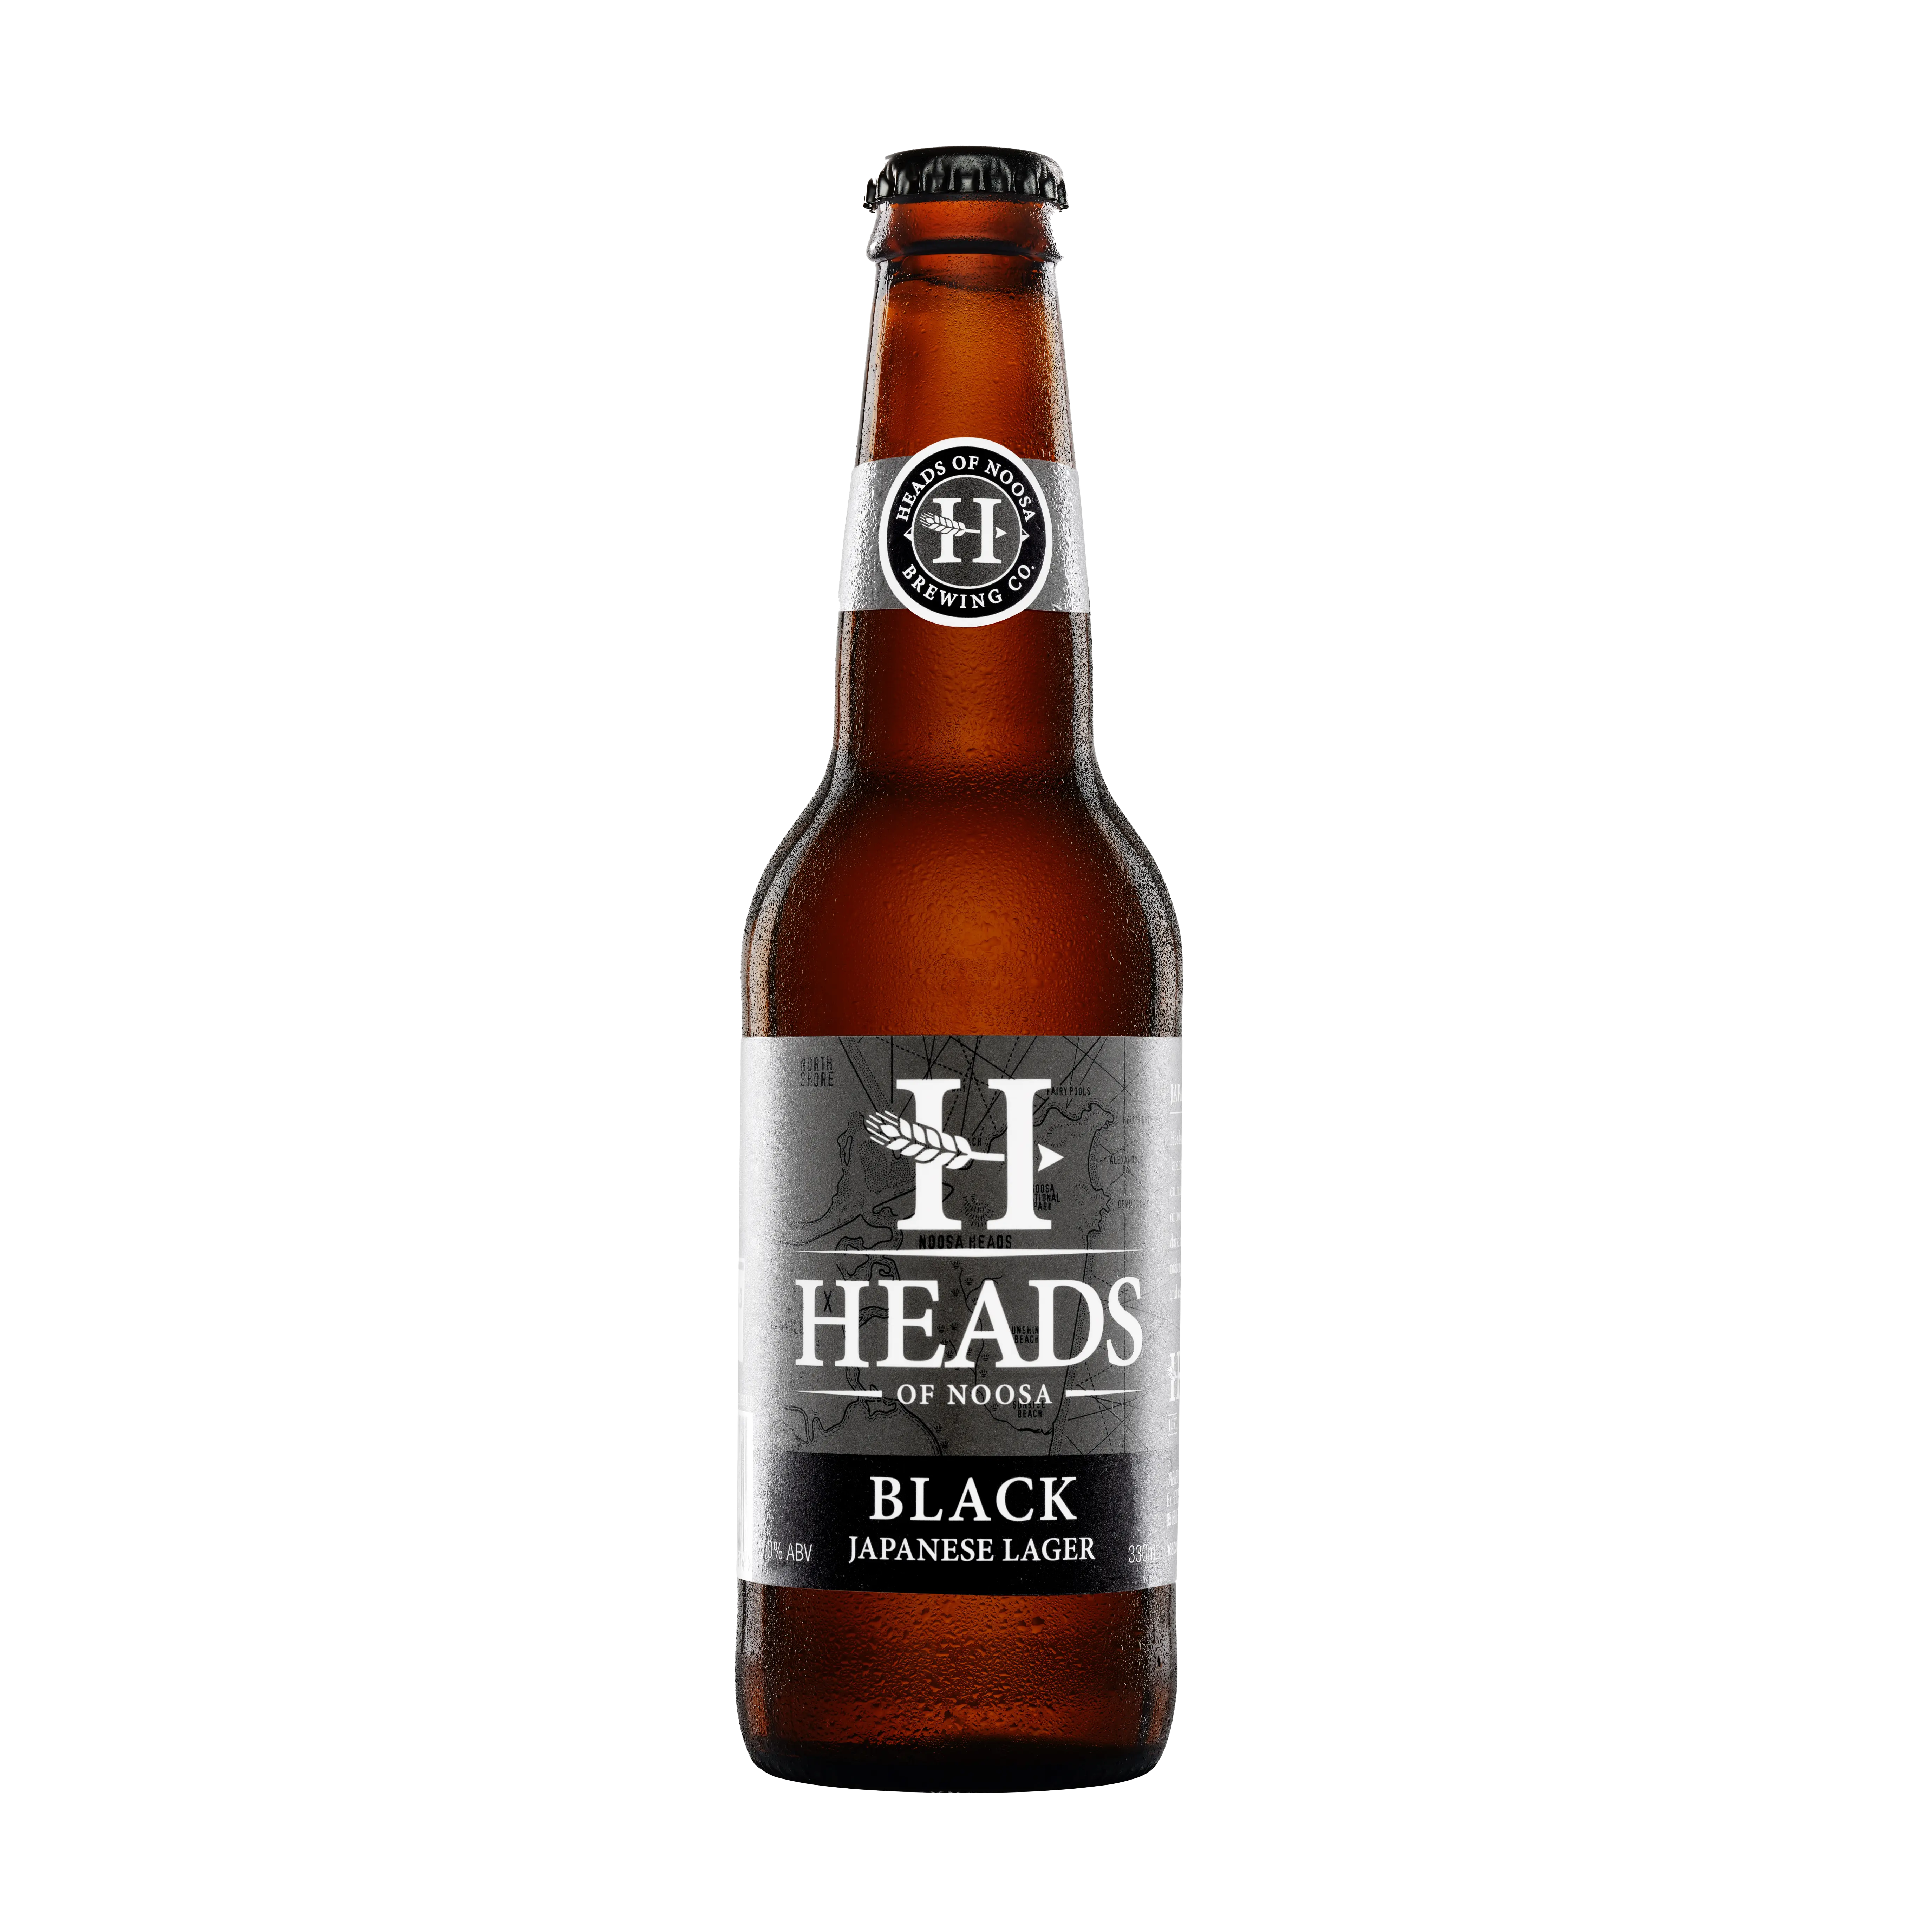 Black Japanese Lager by Heads of Noosa